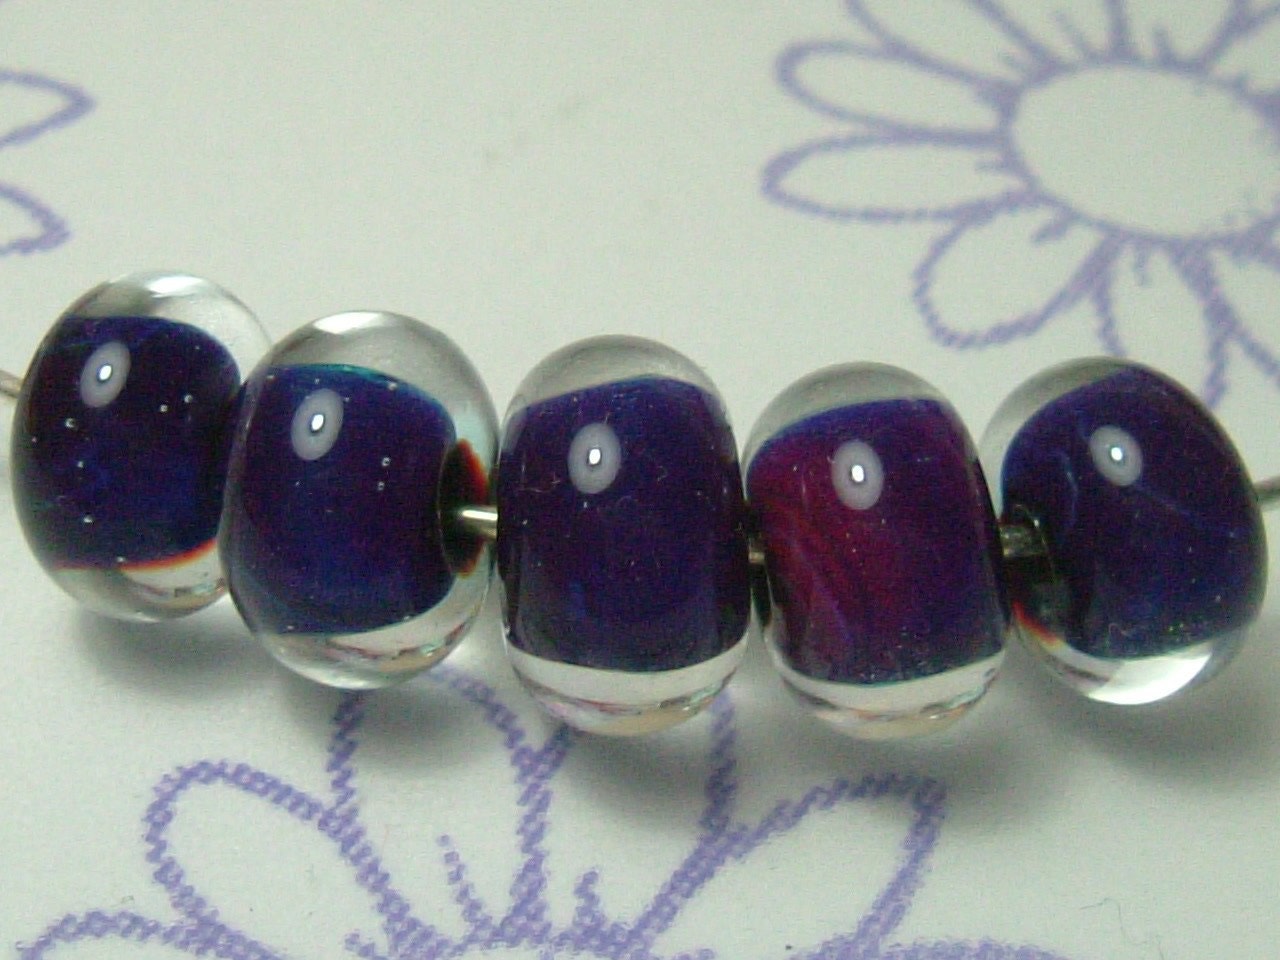 A set of 5 beads, made using reactive glass which has given shades of mainly purples and blues. Encased with a thick layer of crystal clear glass.